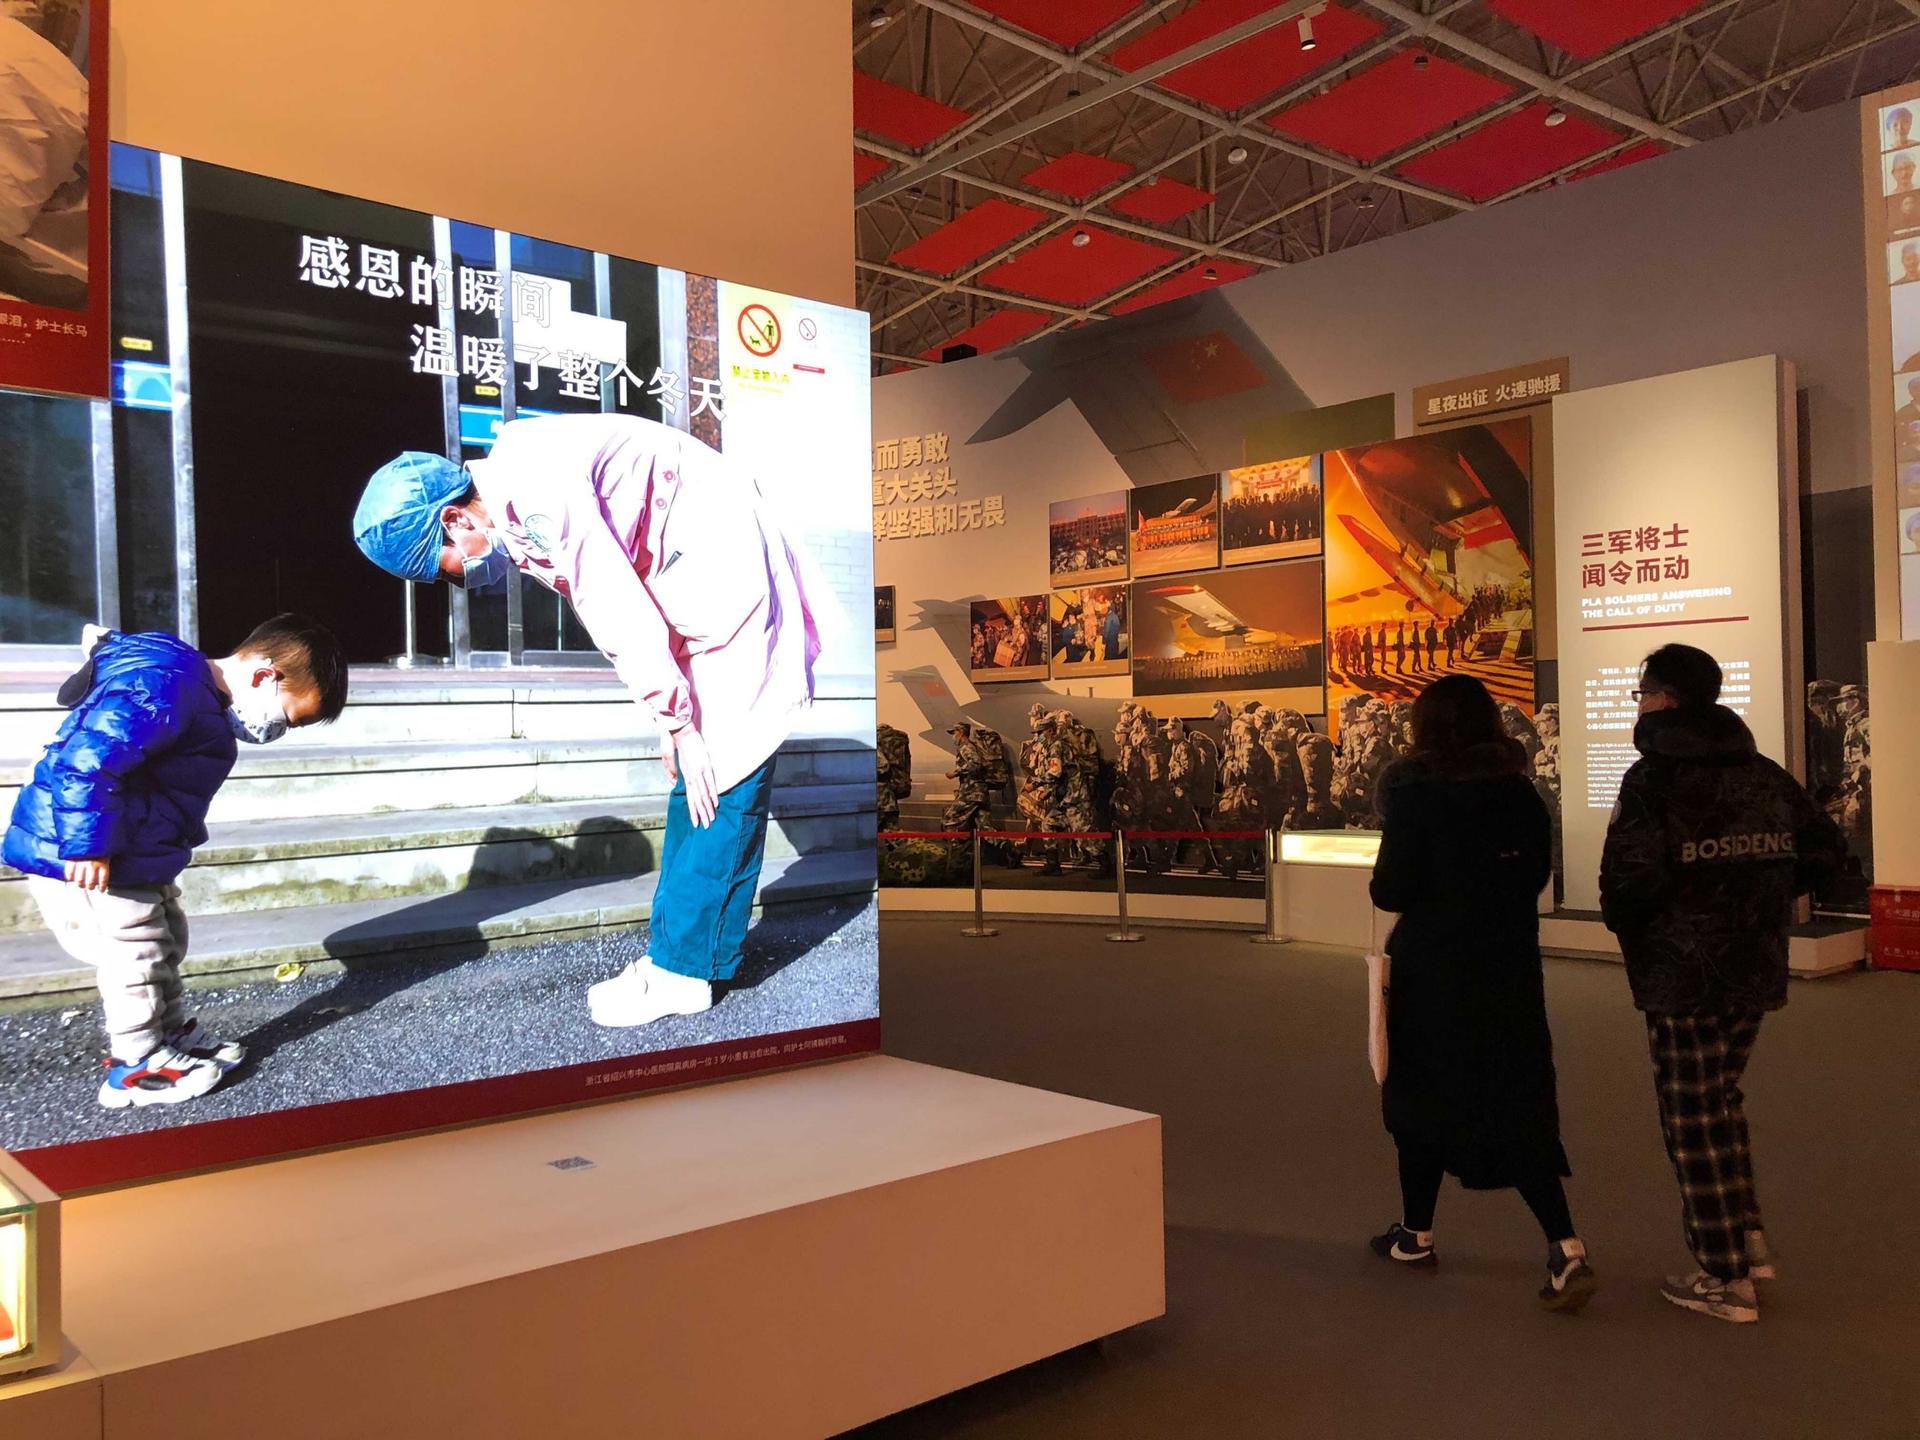 Visitors at the COVID-19 Exhibition in Wuhan, China, get a closer look at photos on display.